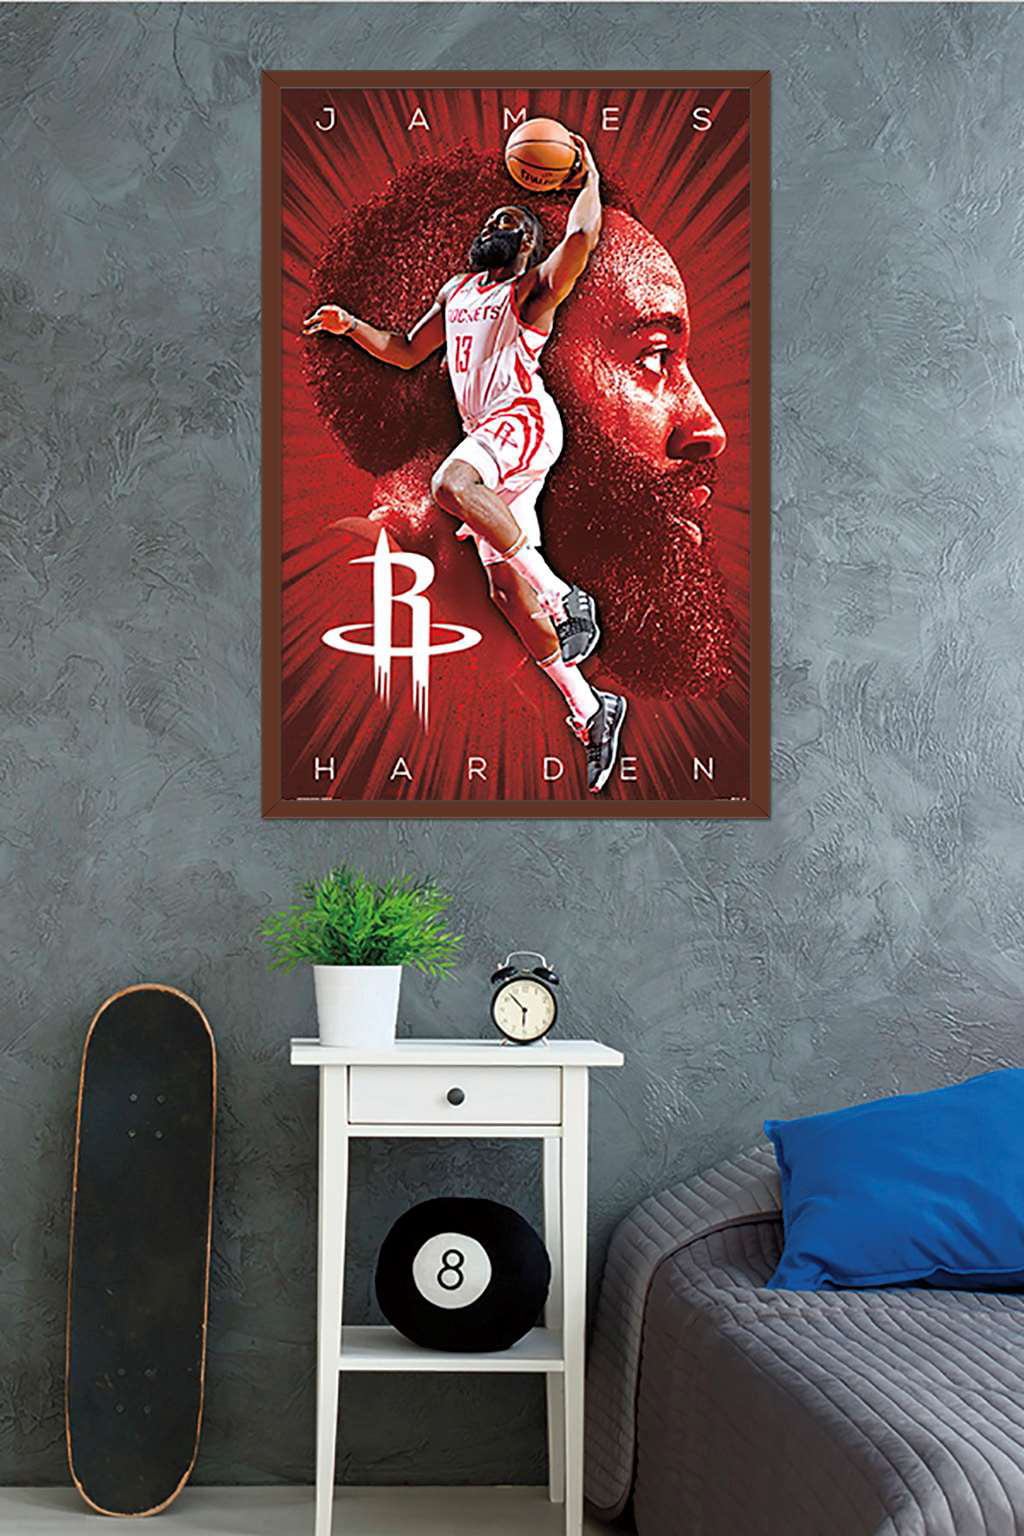 James Harden Basketball Player Poster (160) Wall Art Poster Scroll Canvas  Painting Picture Living Room Decor Home Framed/Unframed 08x12inch(20x30cm)